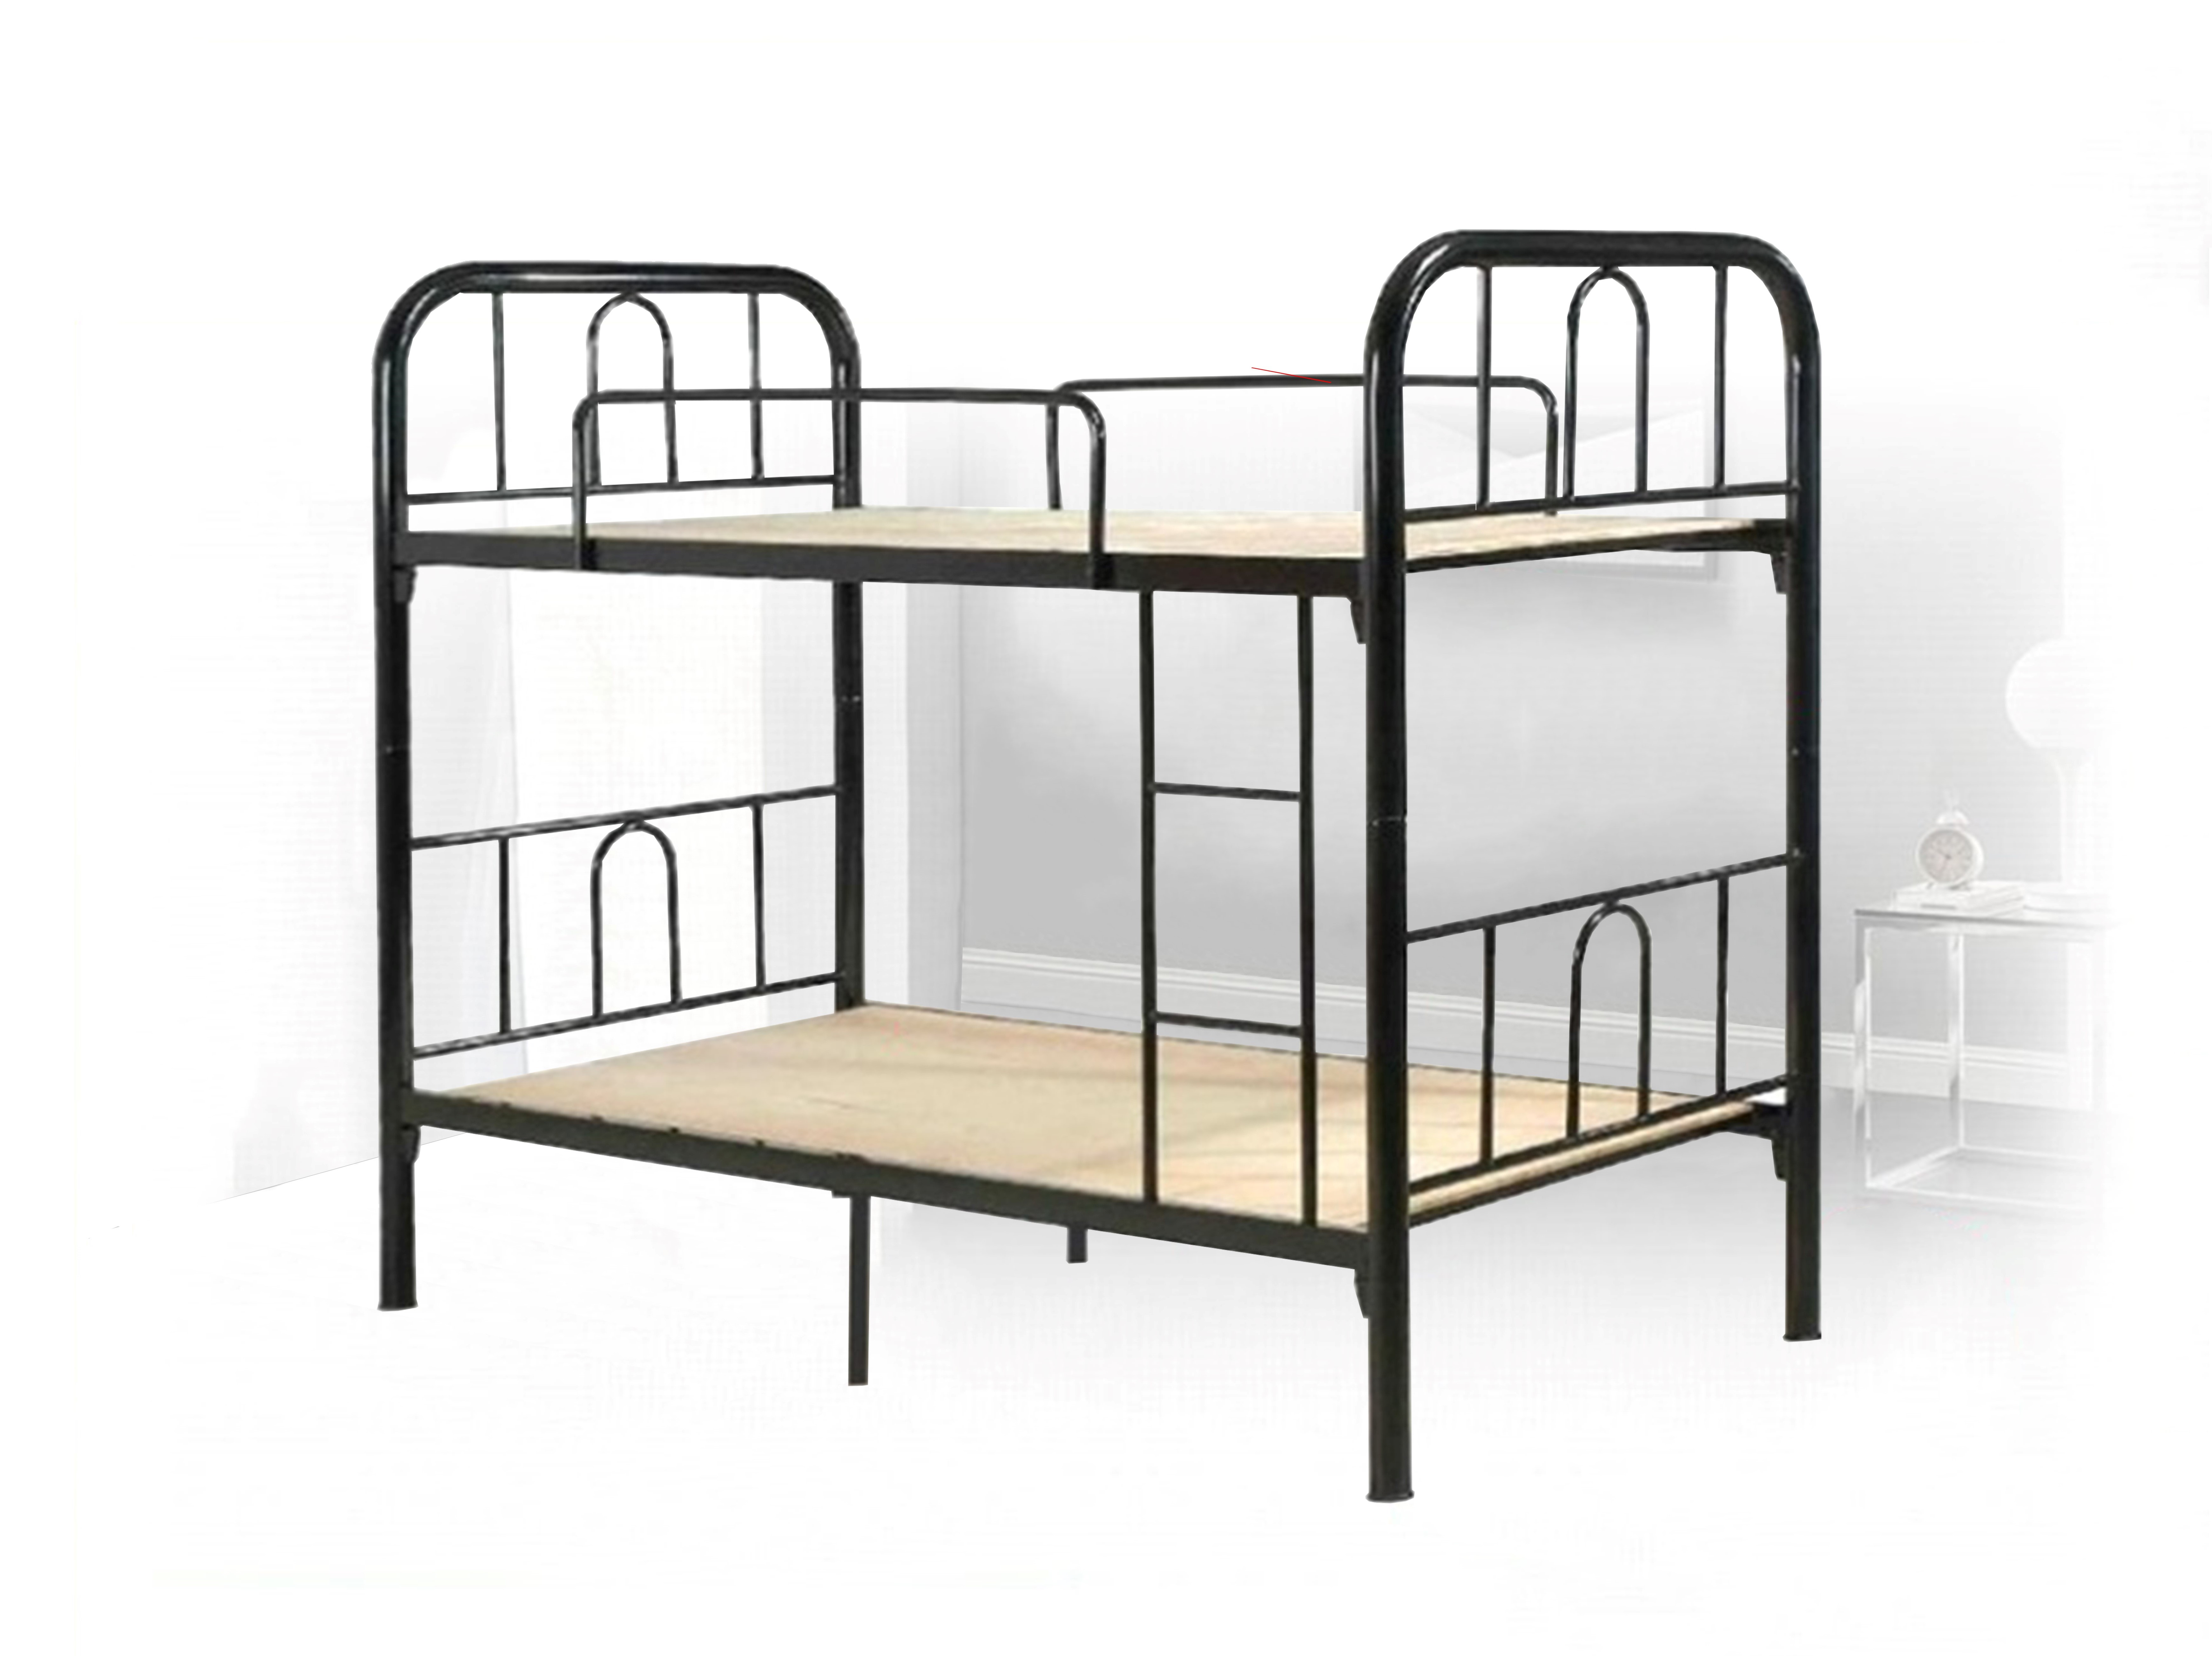 Hostel Double Decker Metal Bed Frame : KT-HDD704 malaysia kuala lumpur shah alam klang valley